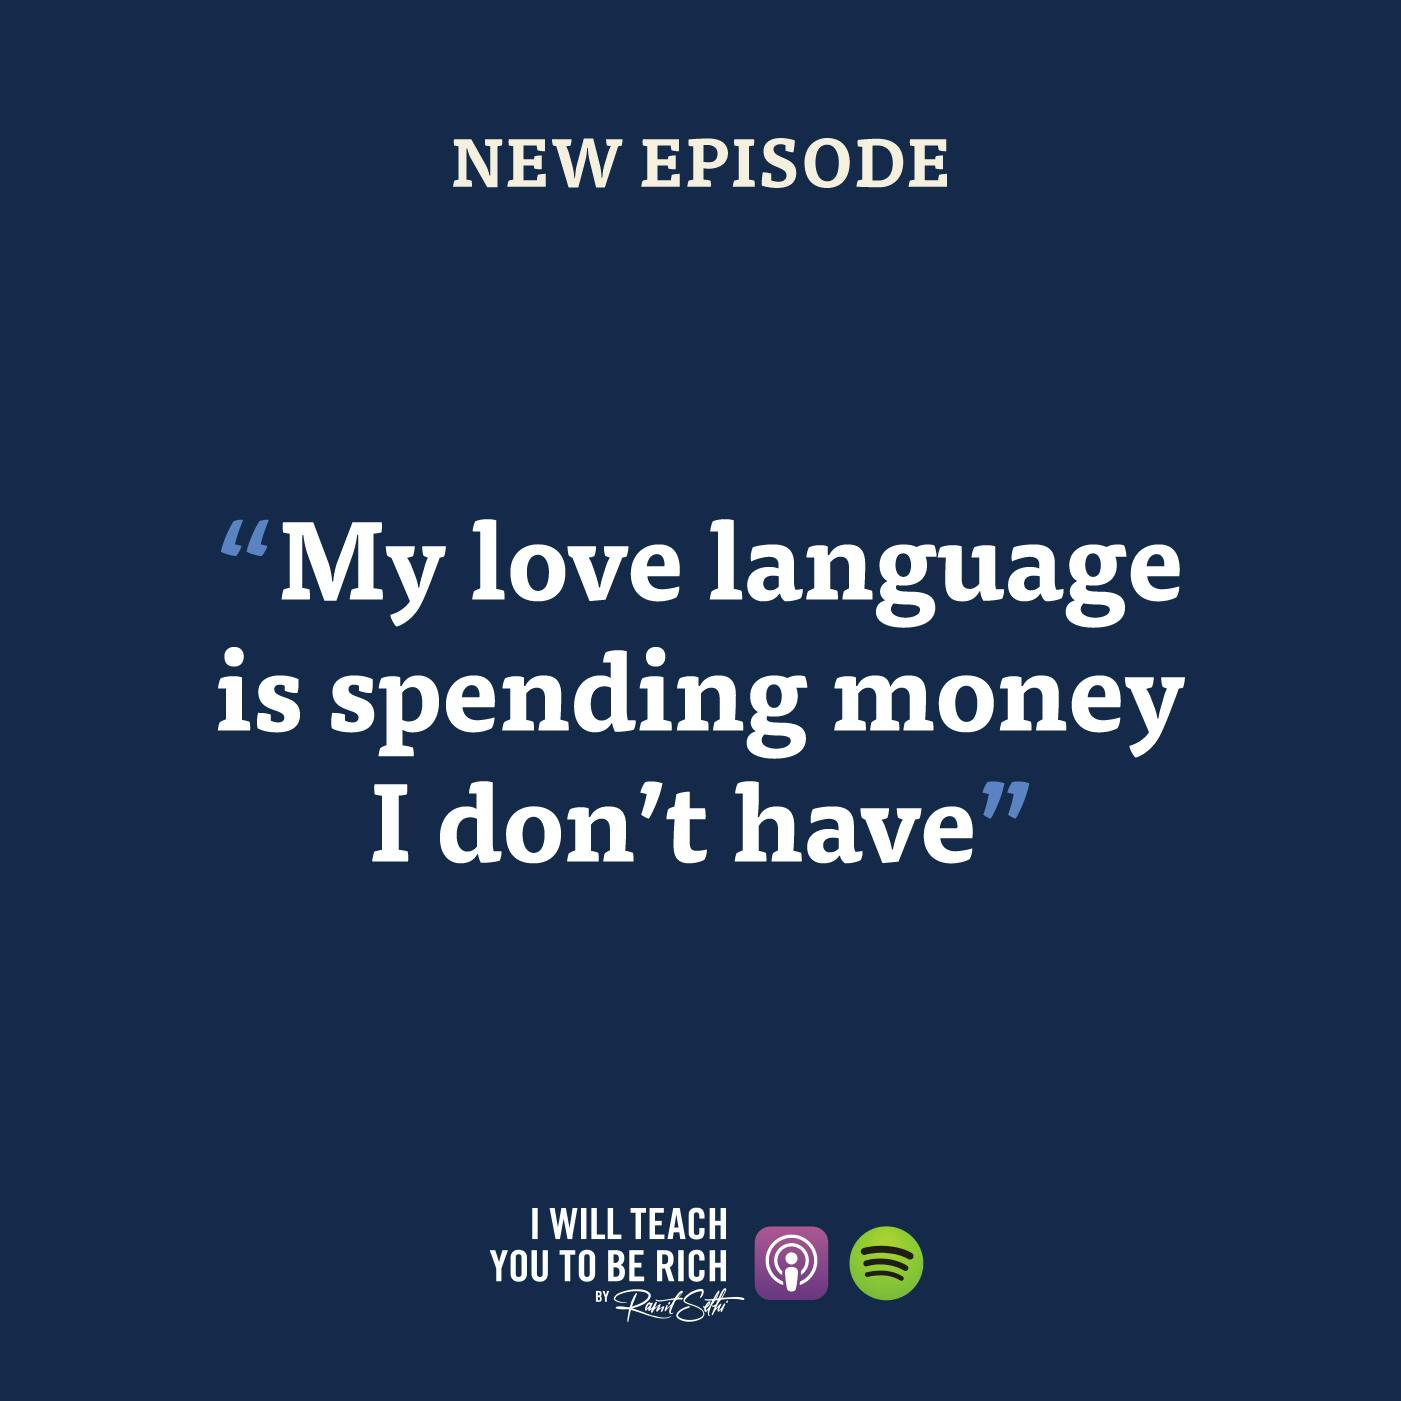 37. “My love language is spending money I don’t have”